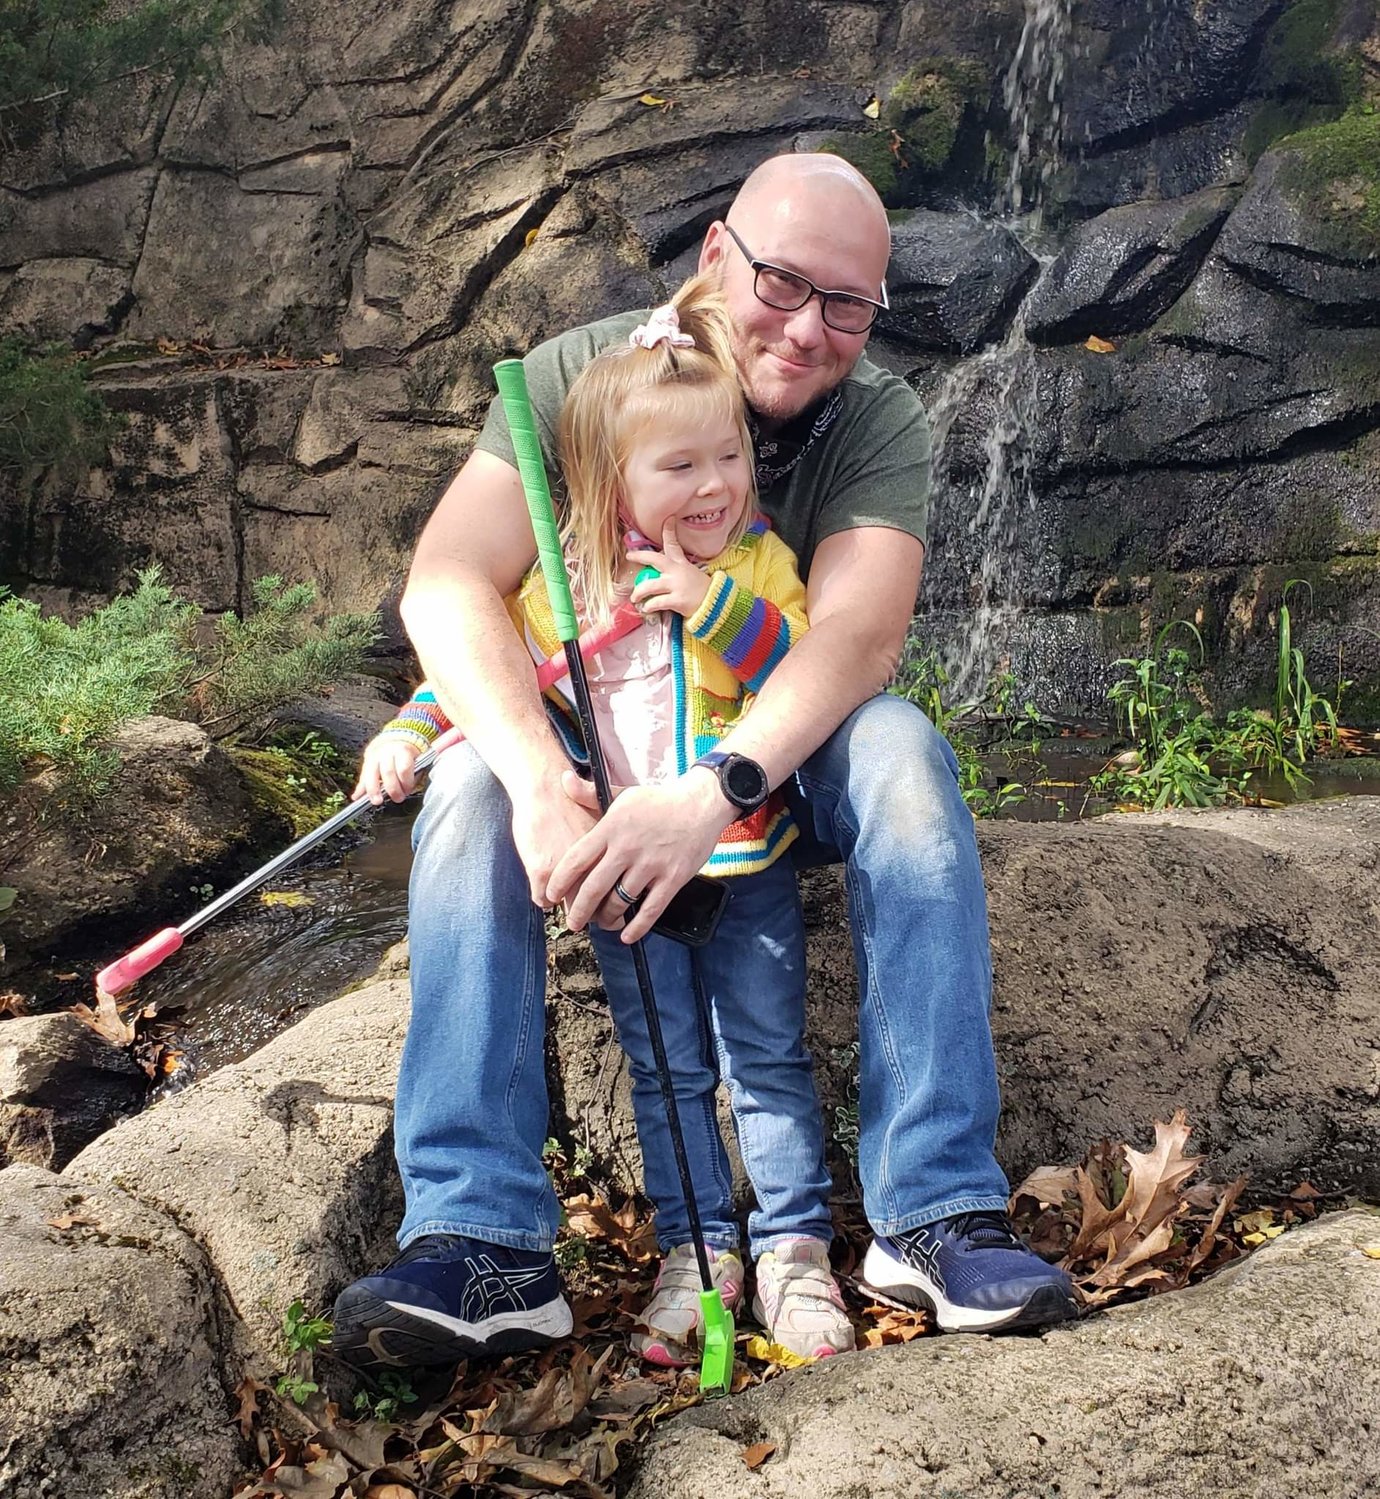 Shane Campbell (with daughter Mackenzie, 4)
Bayport
“Nothing in life worth having comes easily.”